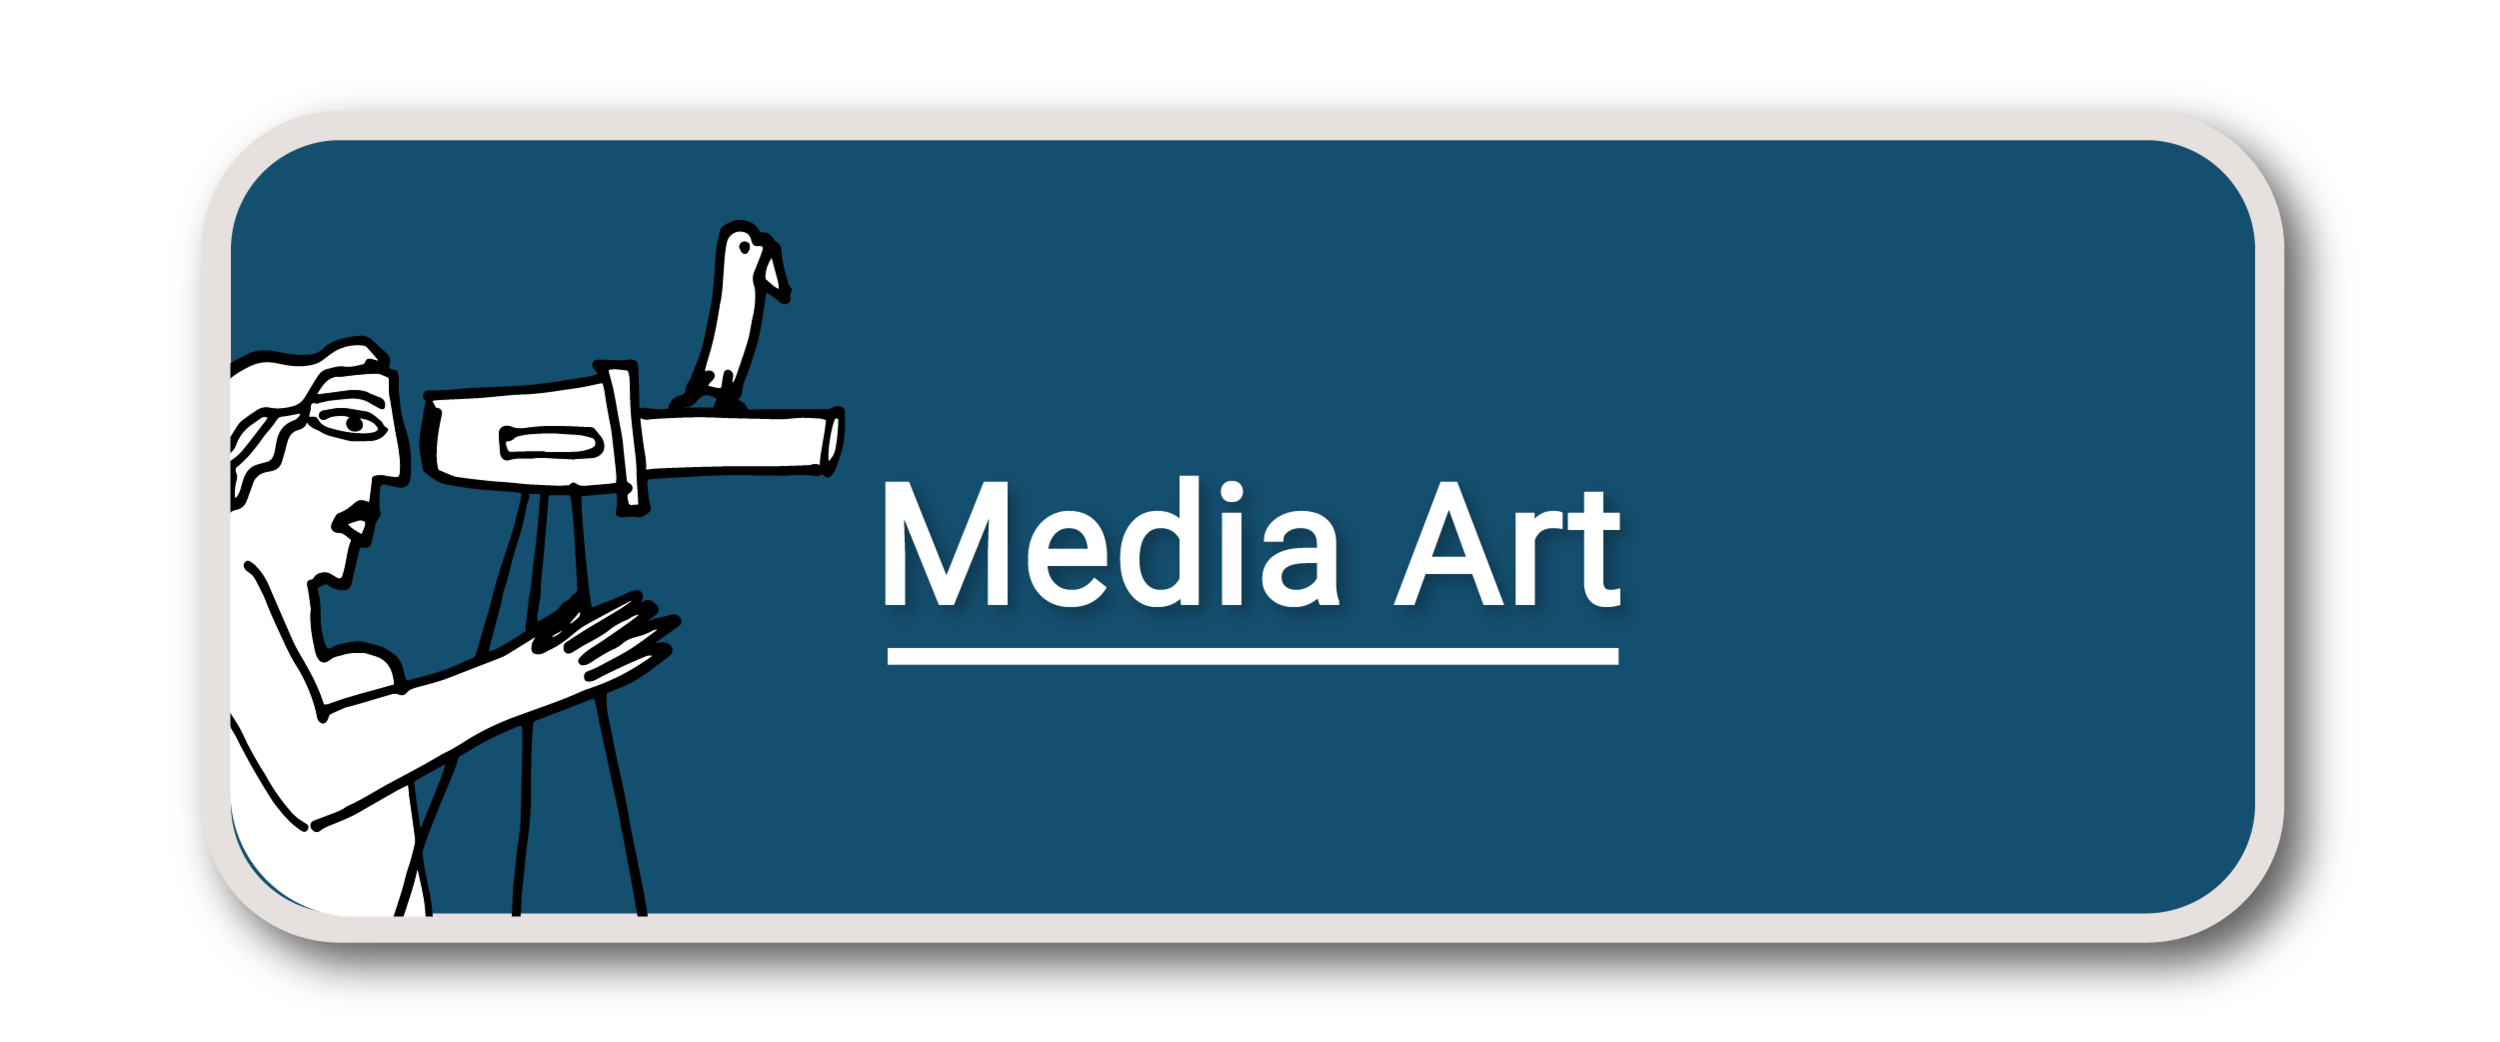 Buttons_Media Arts.png